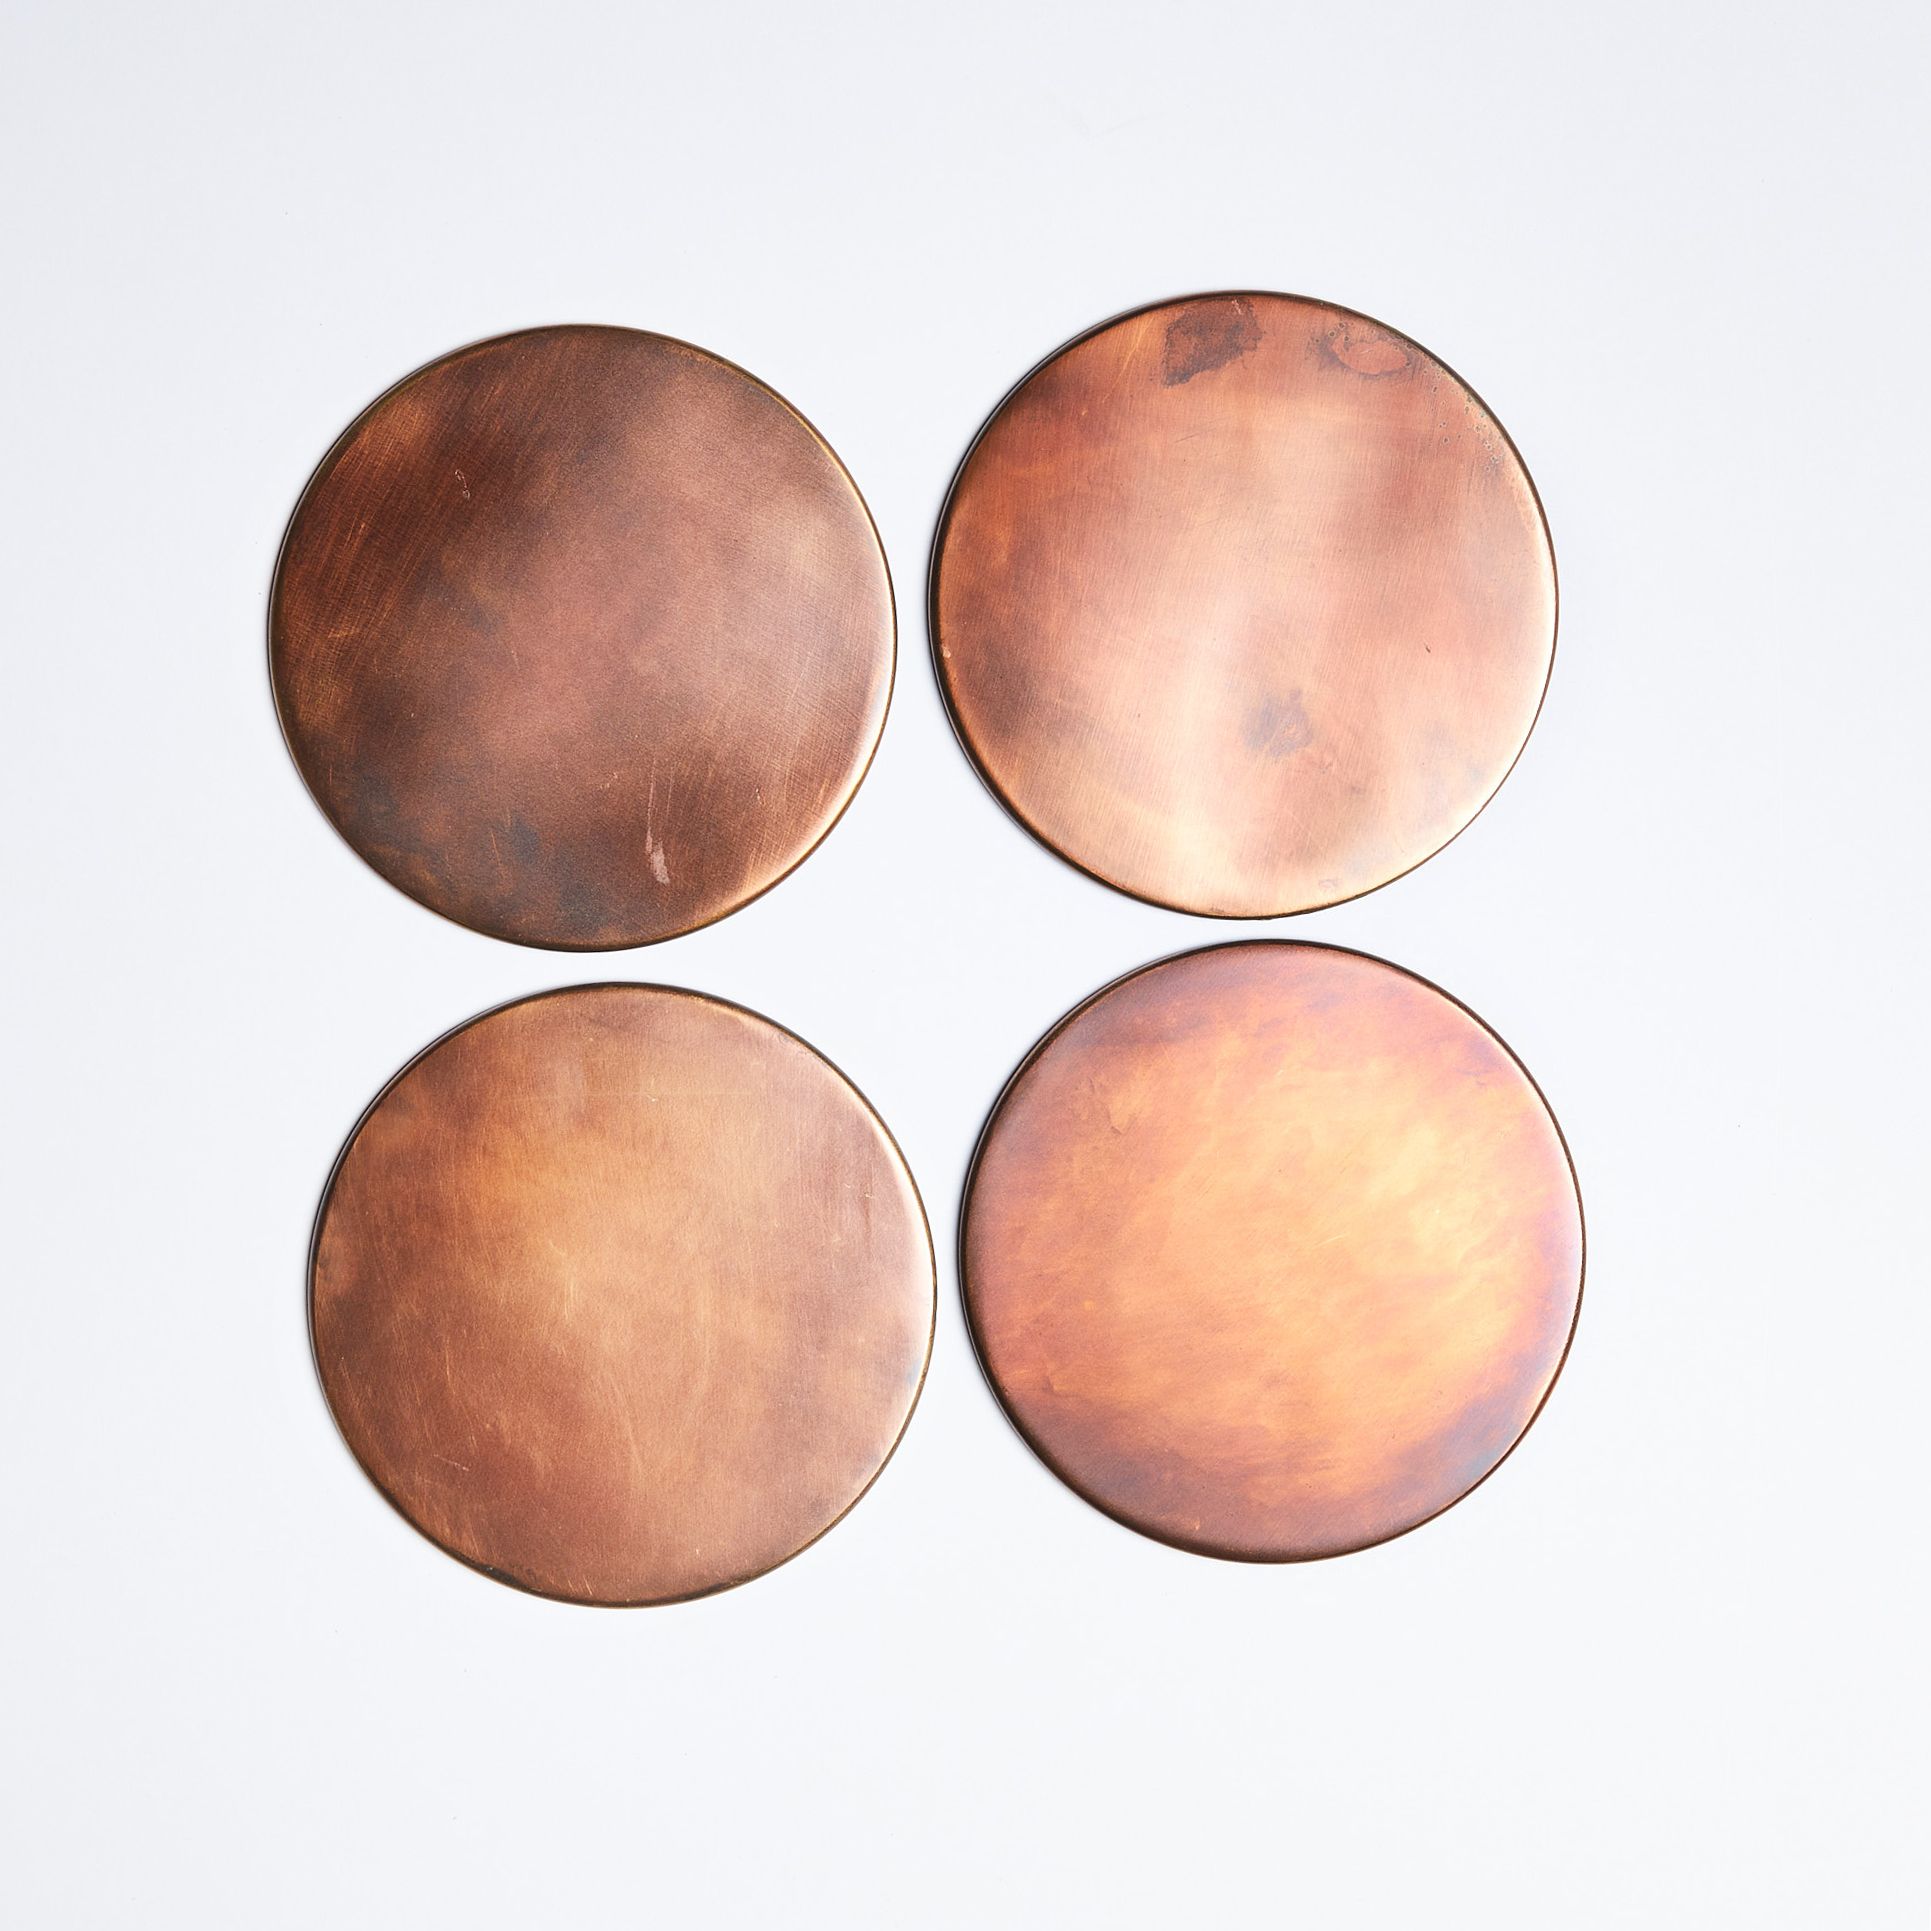 Four round copper coasts arranged in a square grid